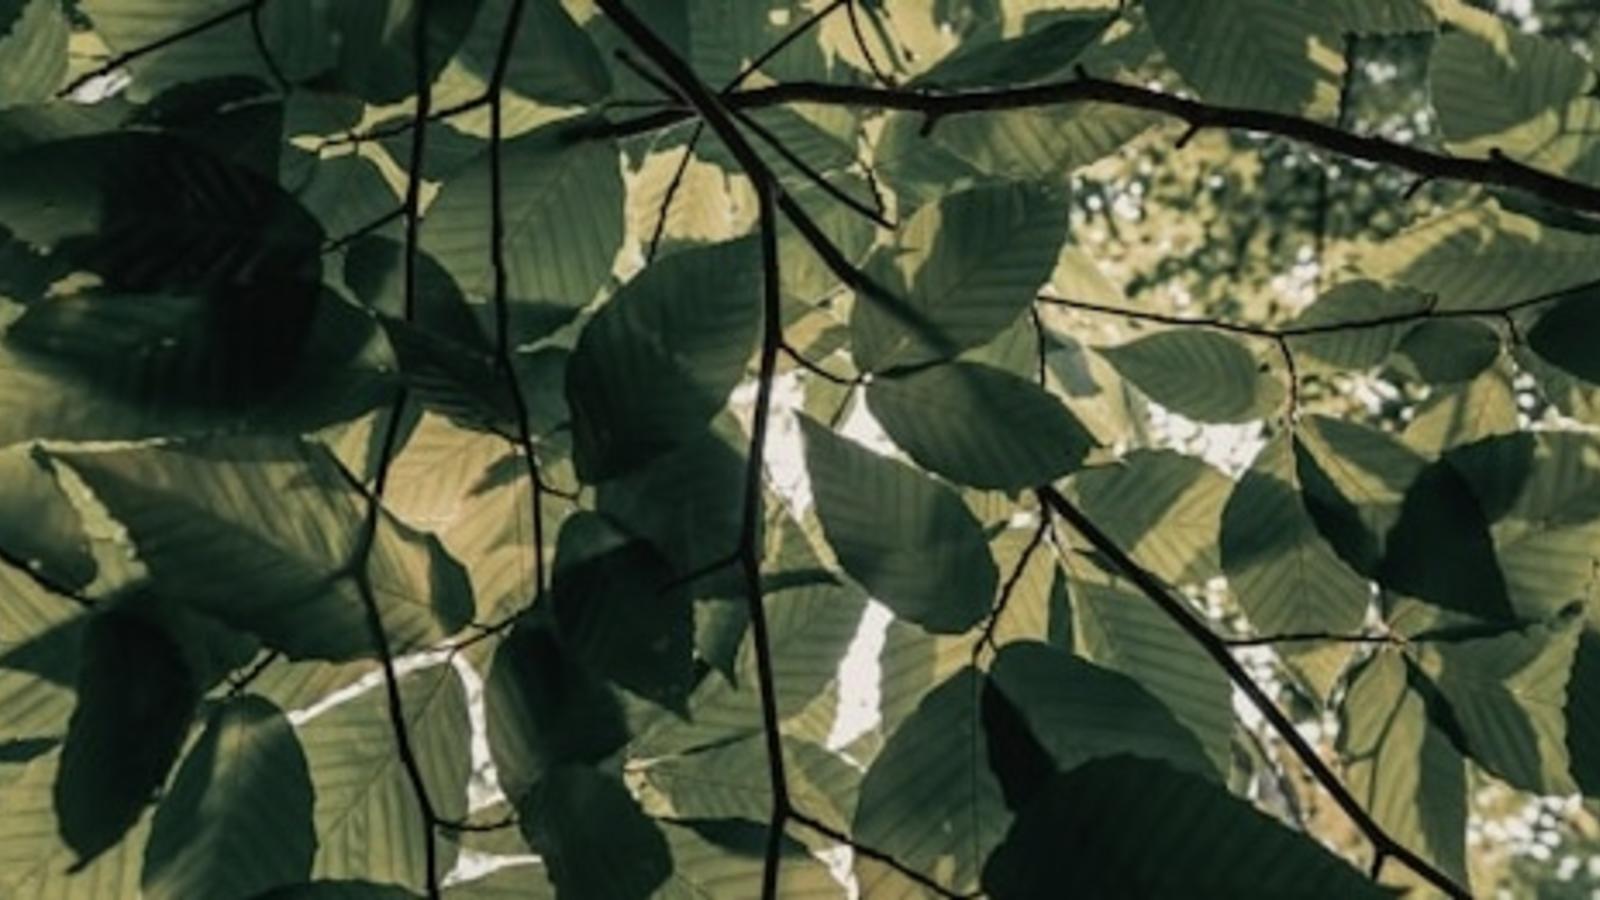 Image of leaves from below with light shining through from below